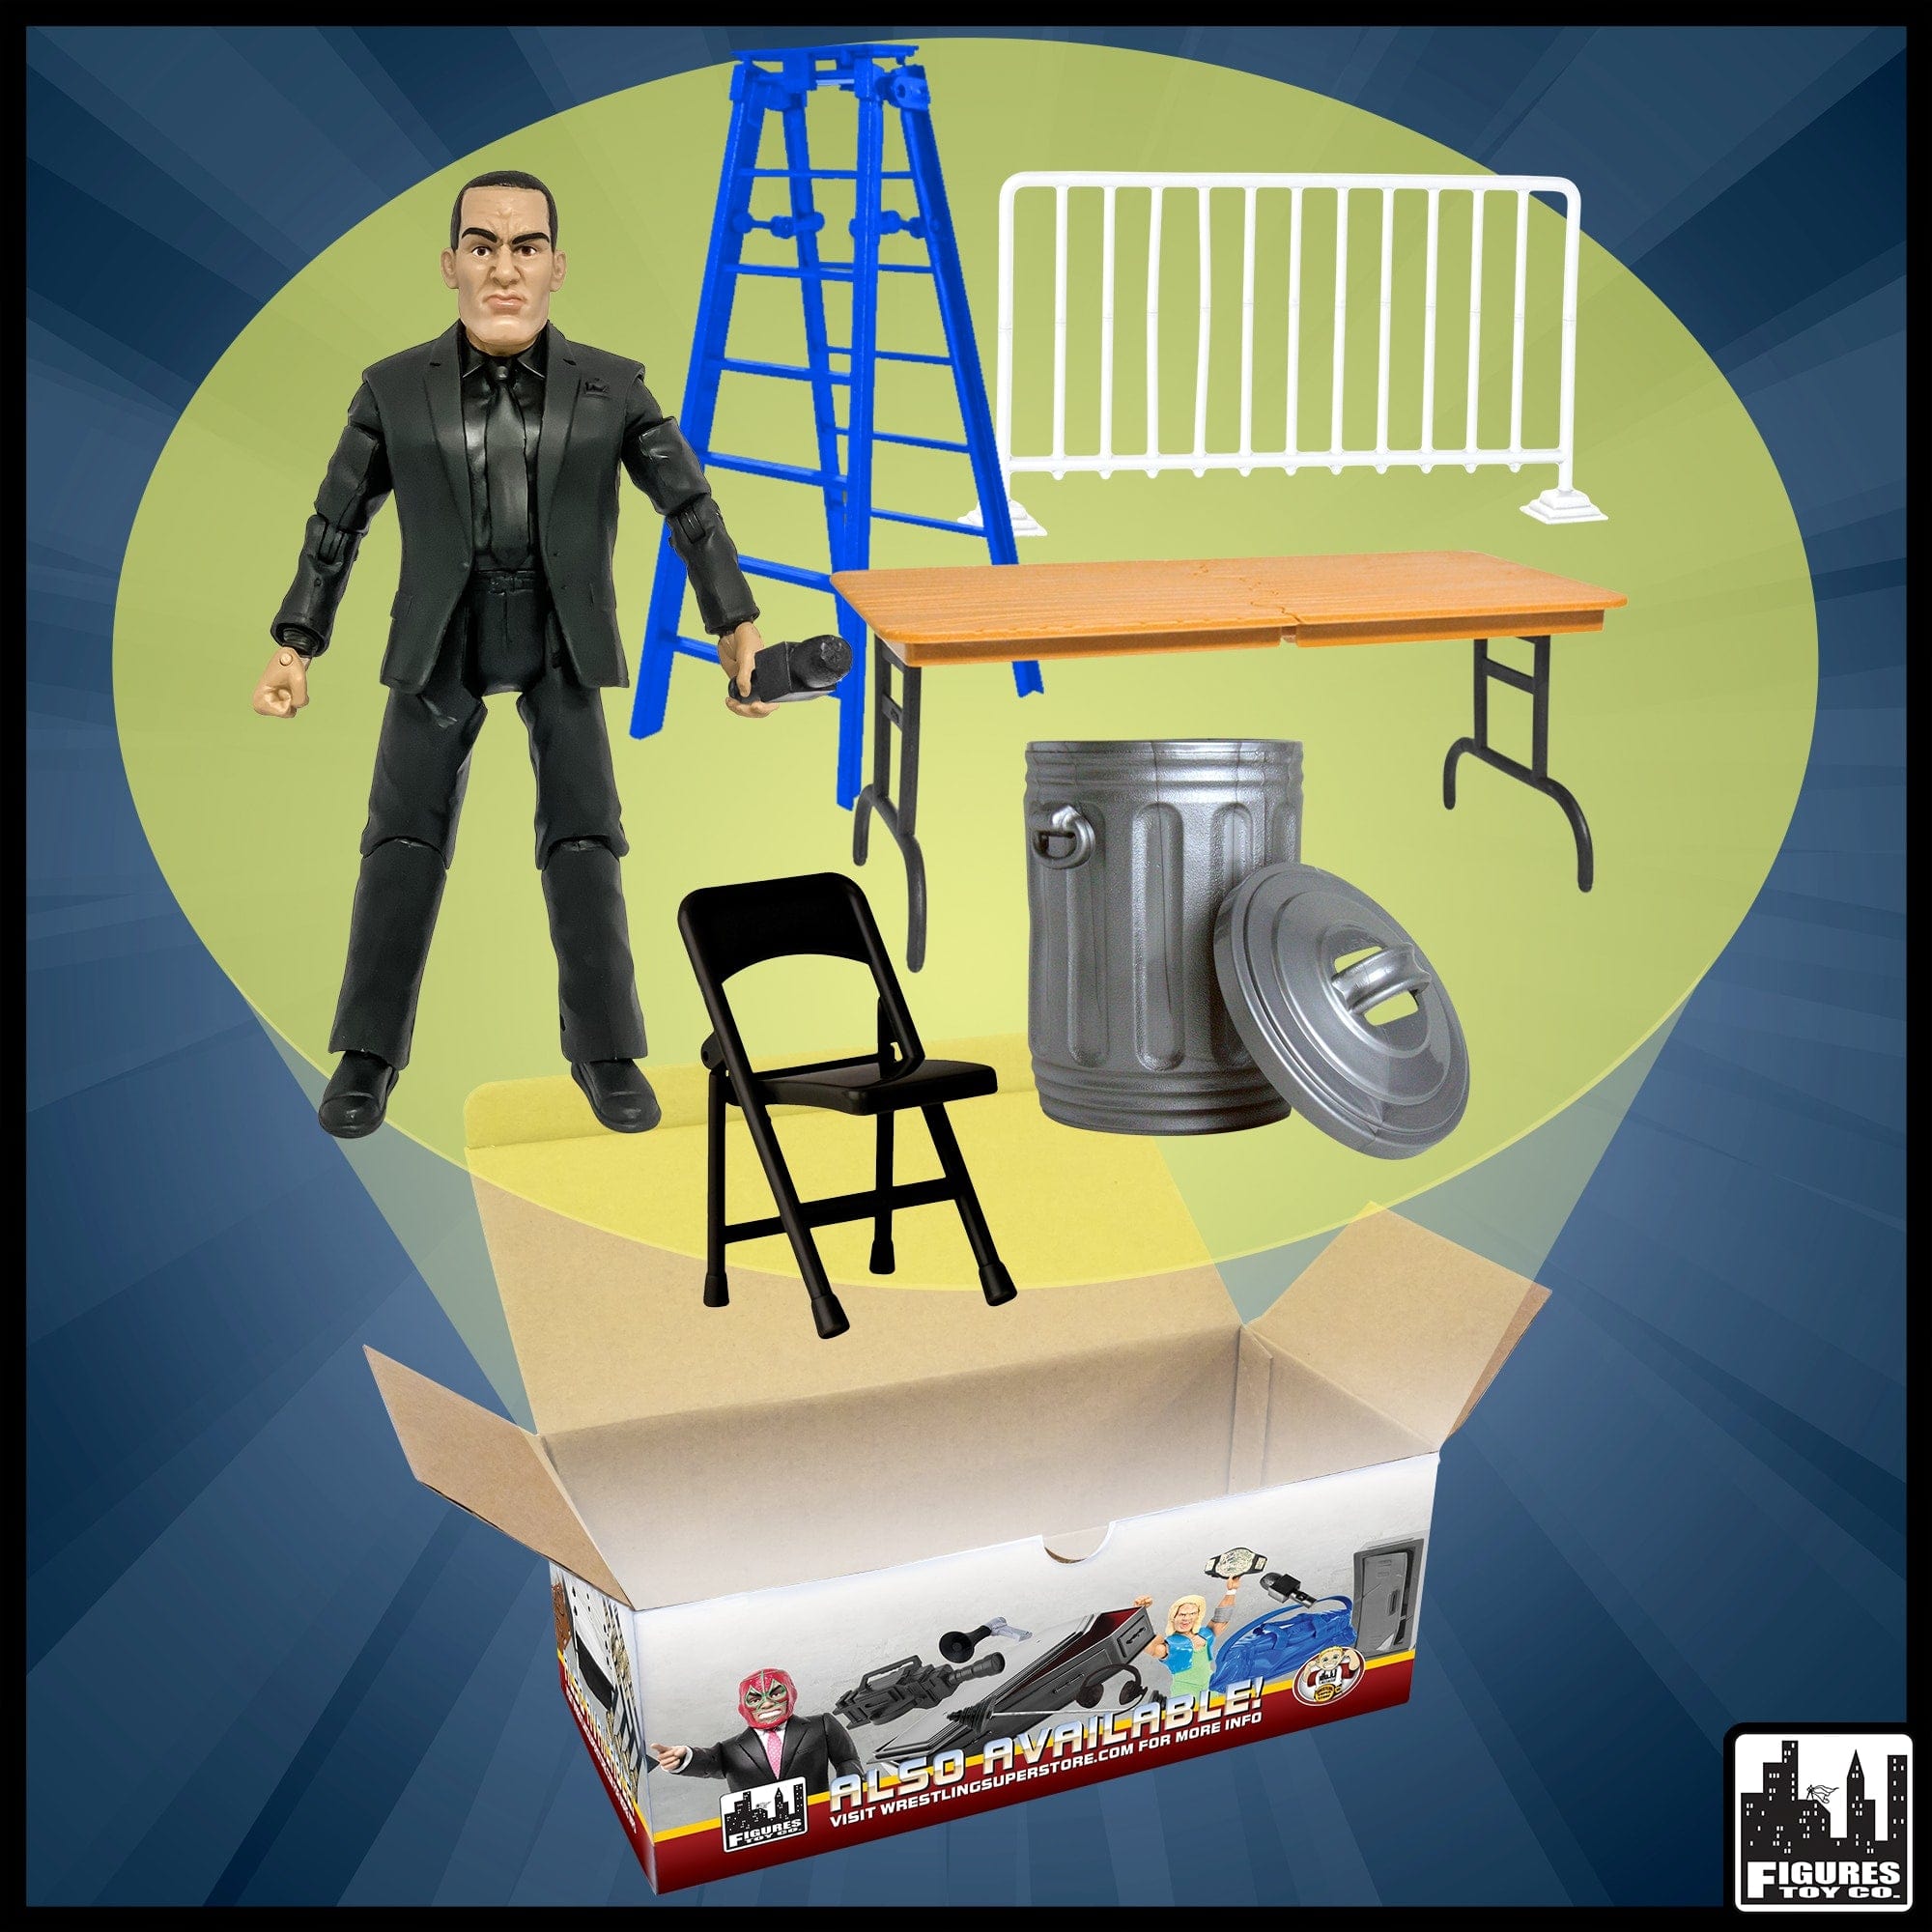 General Manager Action Figure & Accessory Set for WWE Wrestling Action Figures